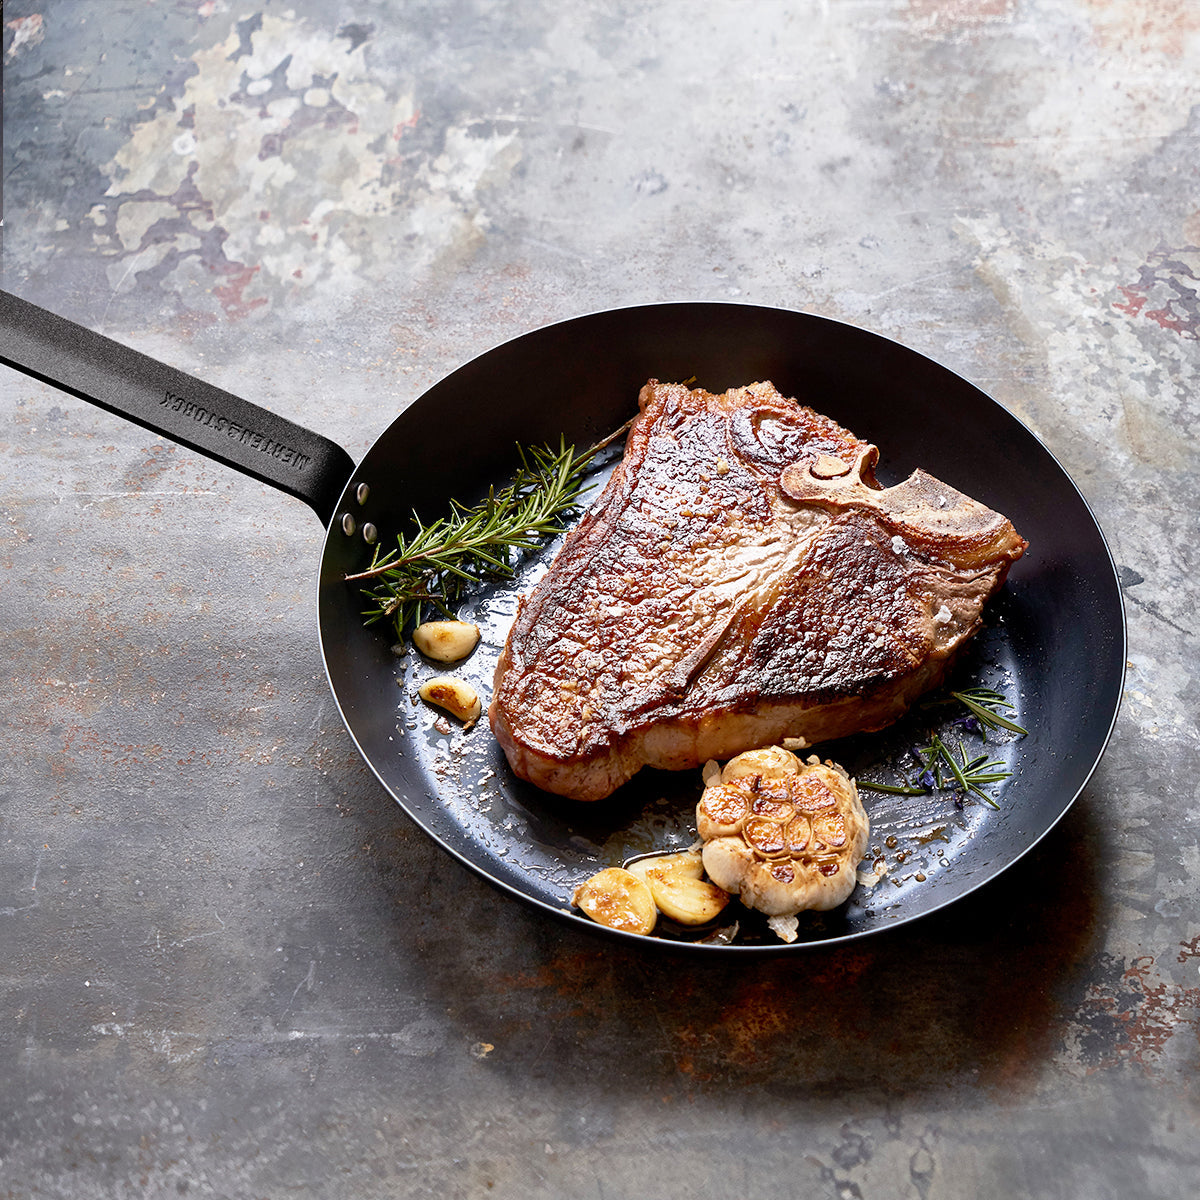 12 inch carbon steel frypan displayed with a cooked steak, roasted garlic, and seasoning on a distressed concrete surface